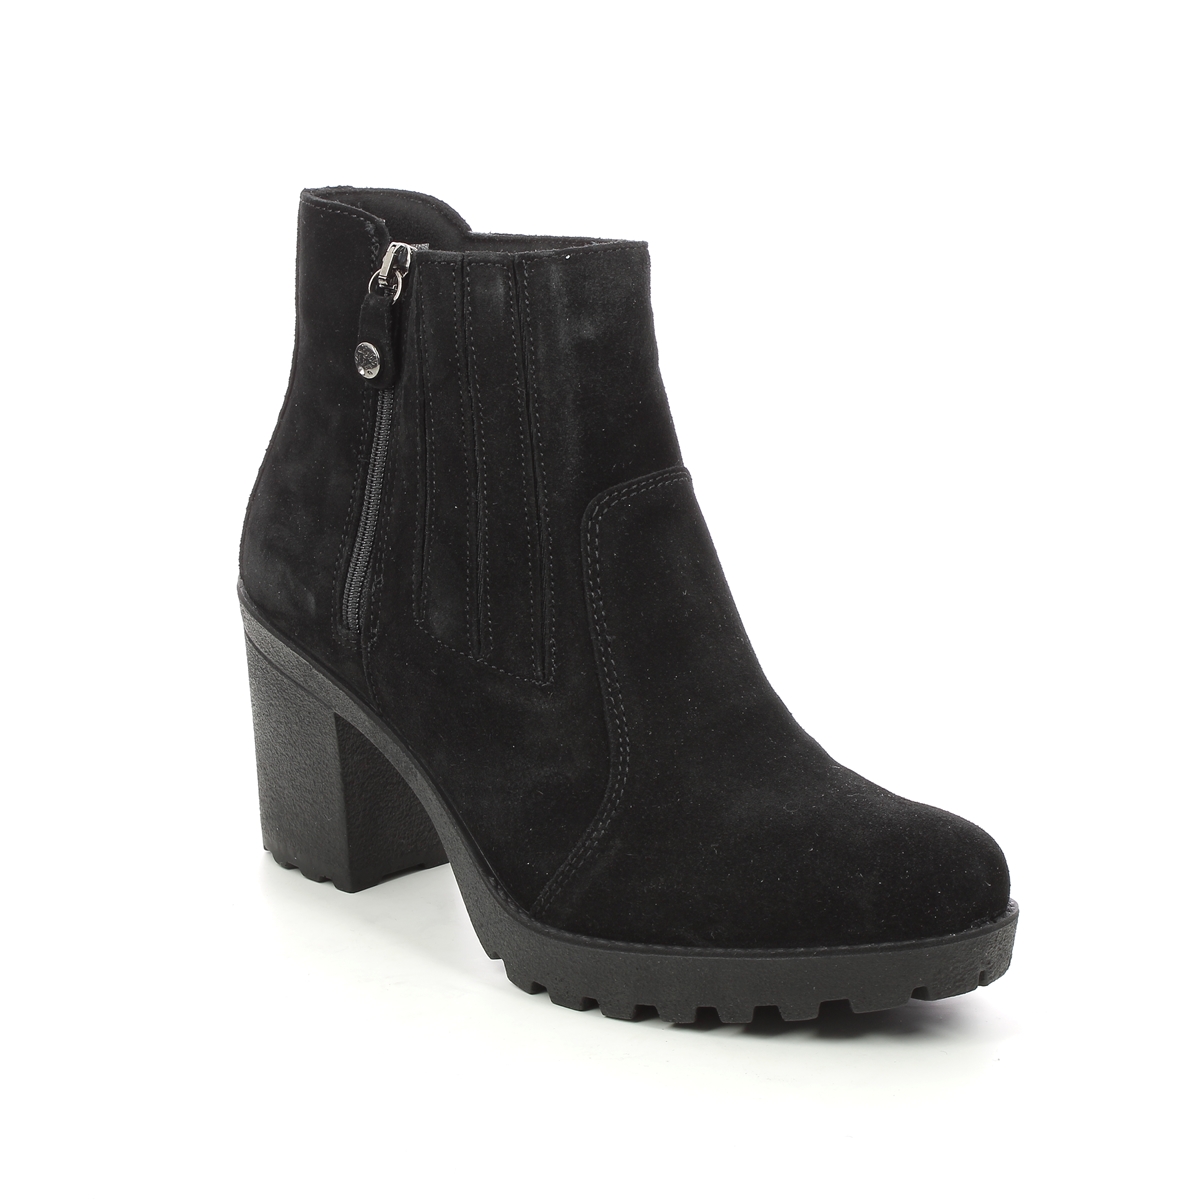 IMAC Vicky 15 Black suede Womens Heeled Boots 8411-7150011 in a Plain Leather in Size 39